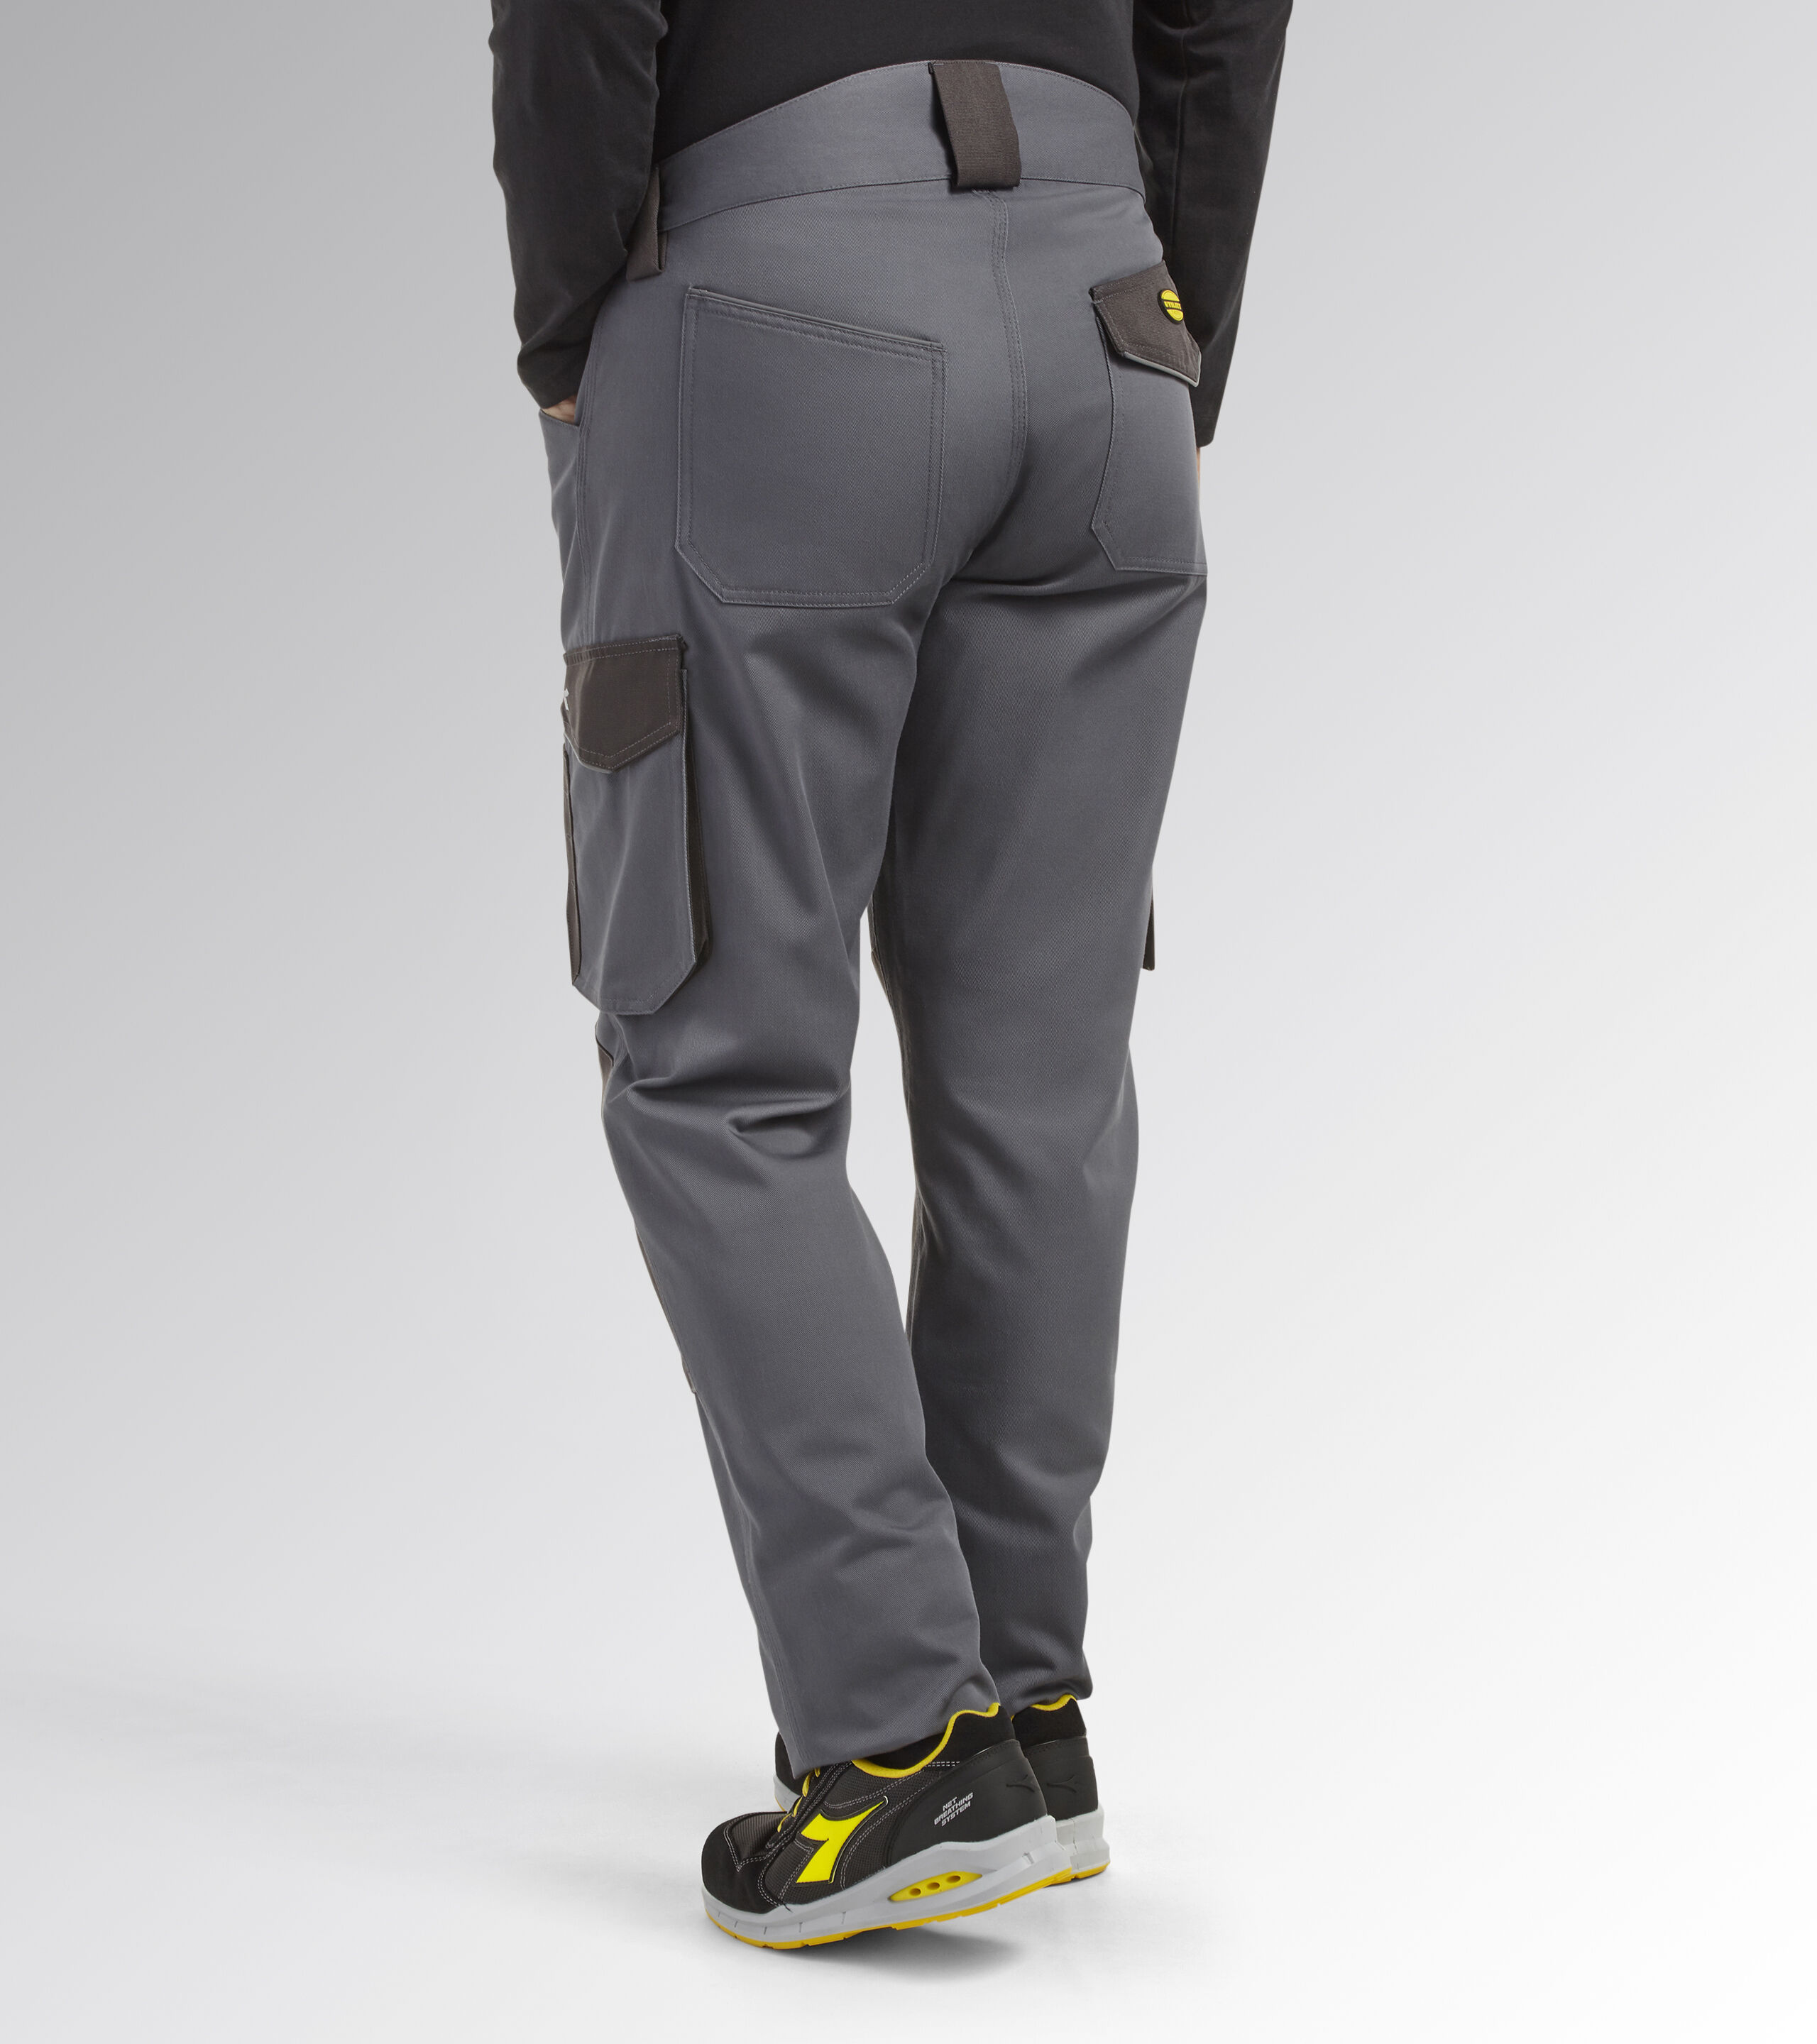 Hi-Vis FR multi norm two tone Trouser | Discover our protective workwear